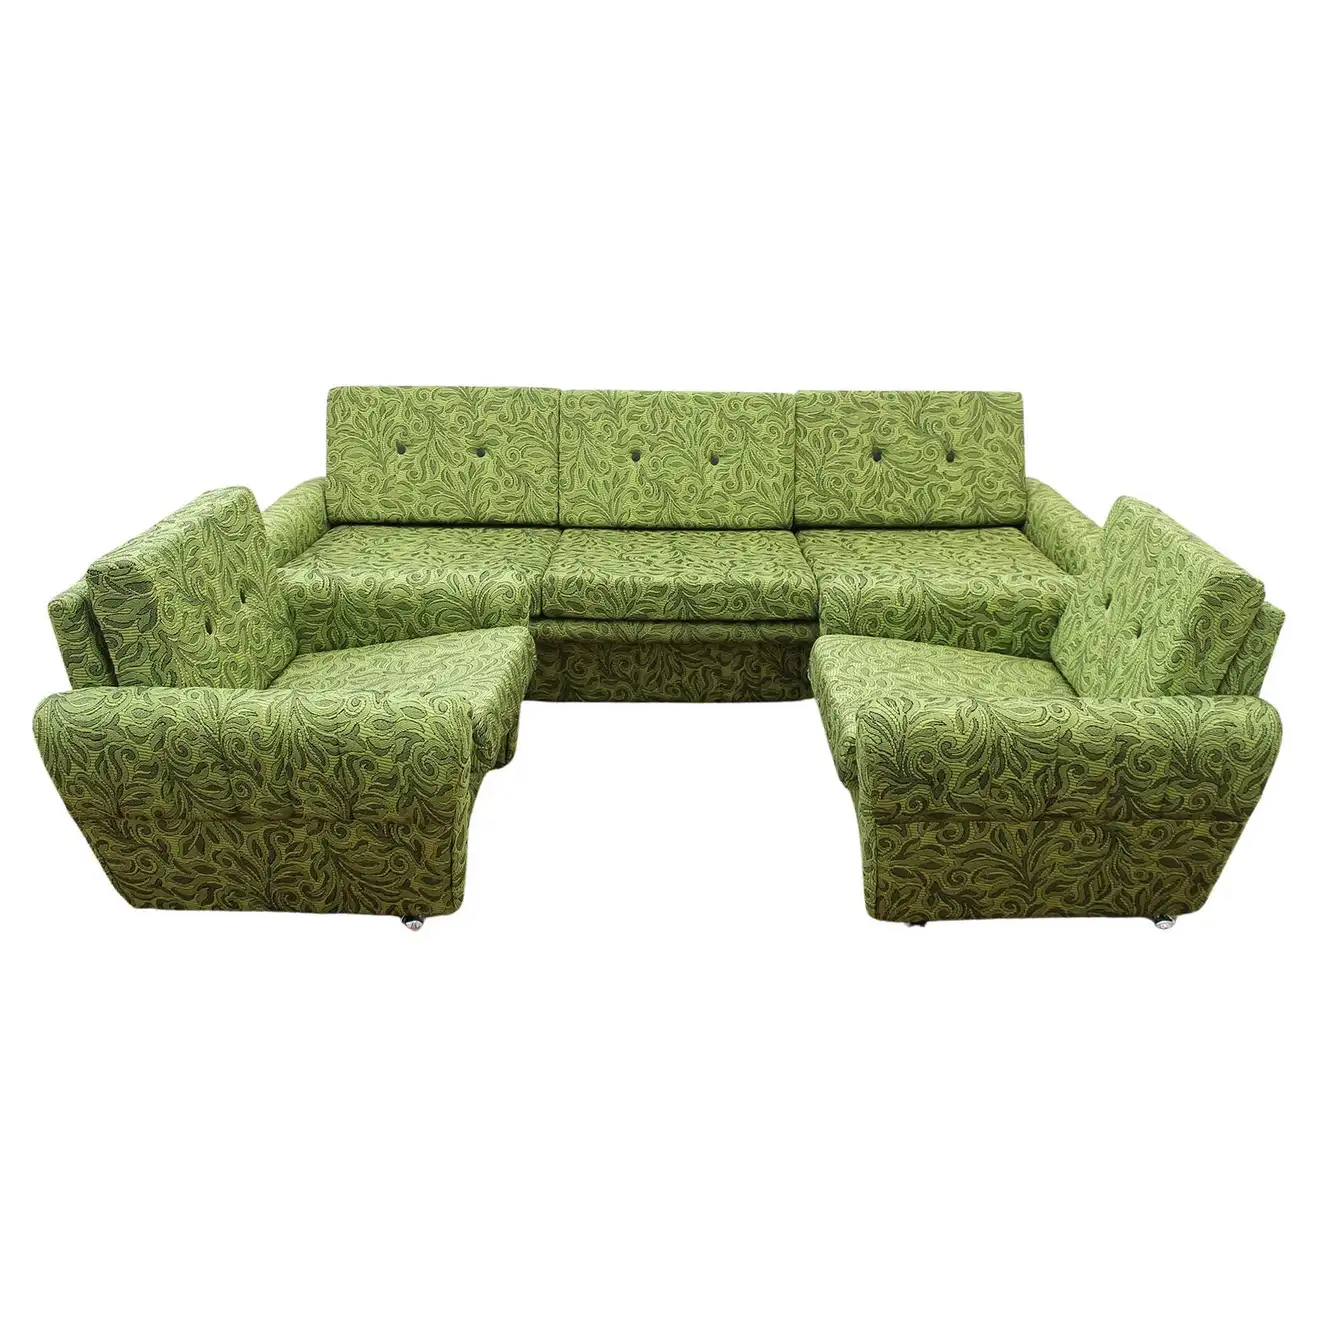 Eastern bloc Vintage living room set, a green couch and chair sitting next to each other.